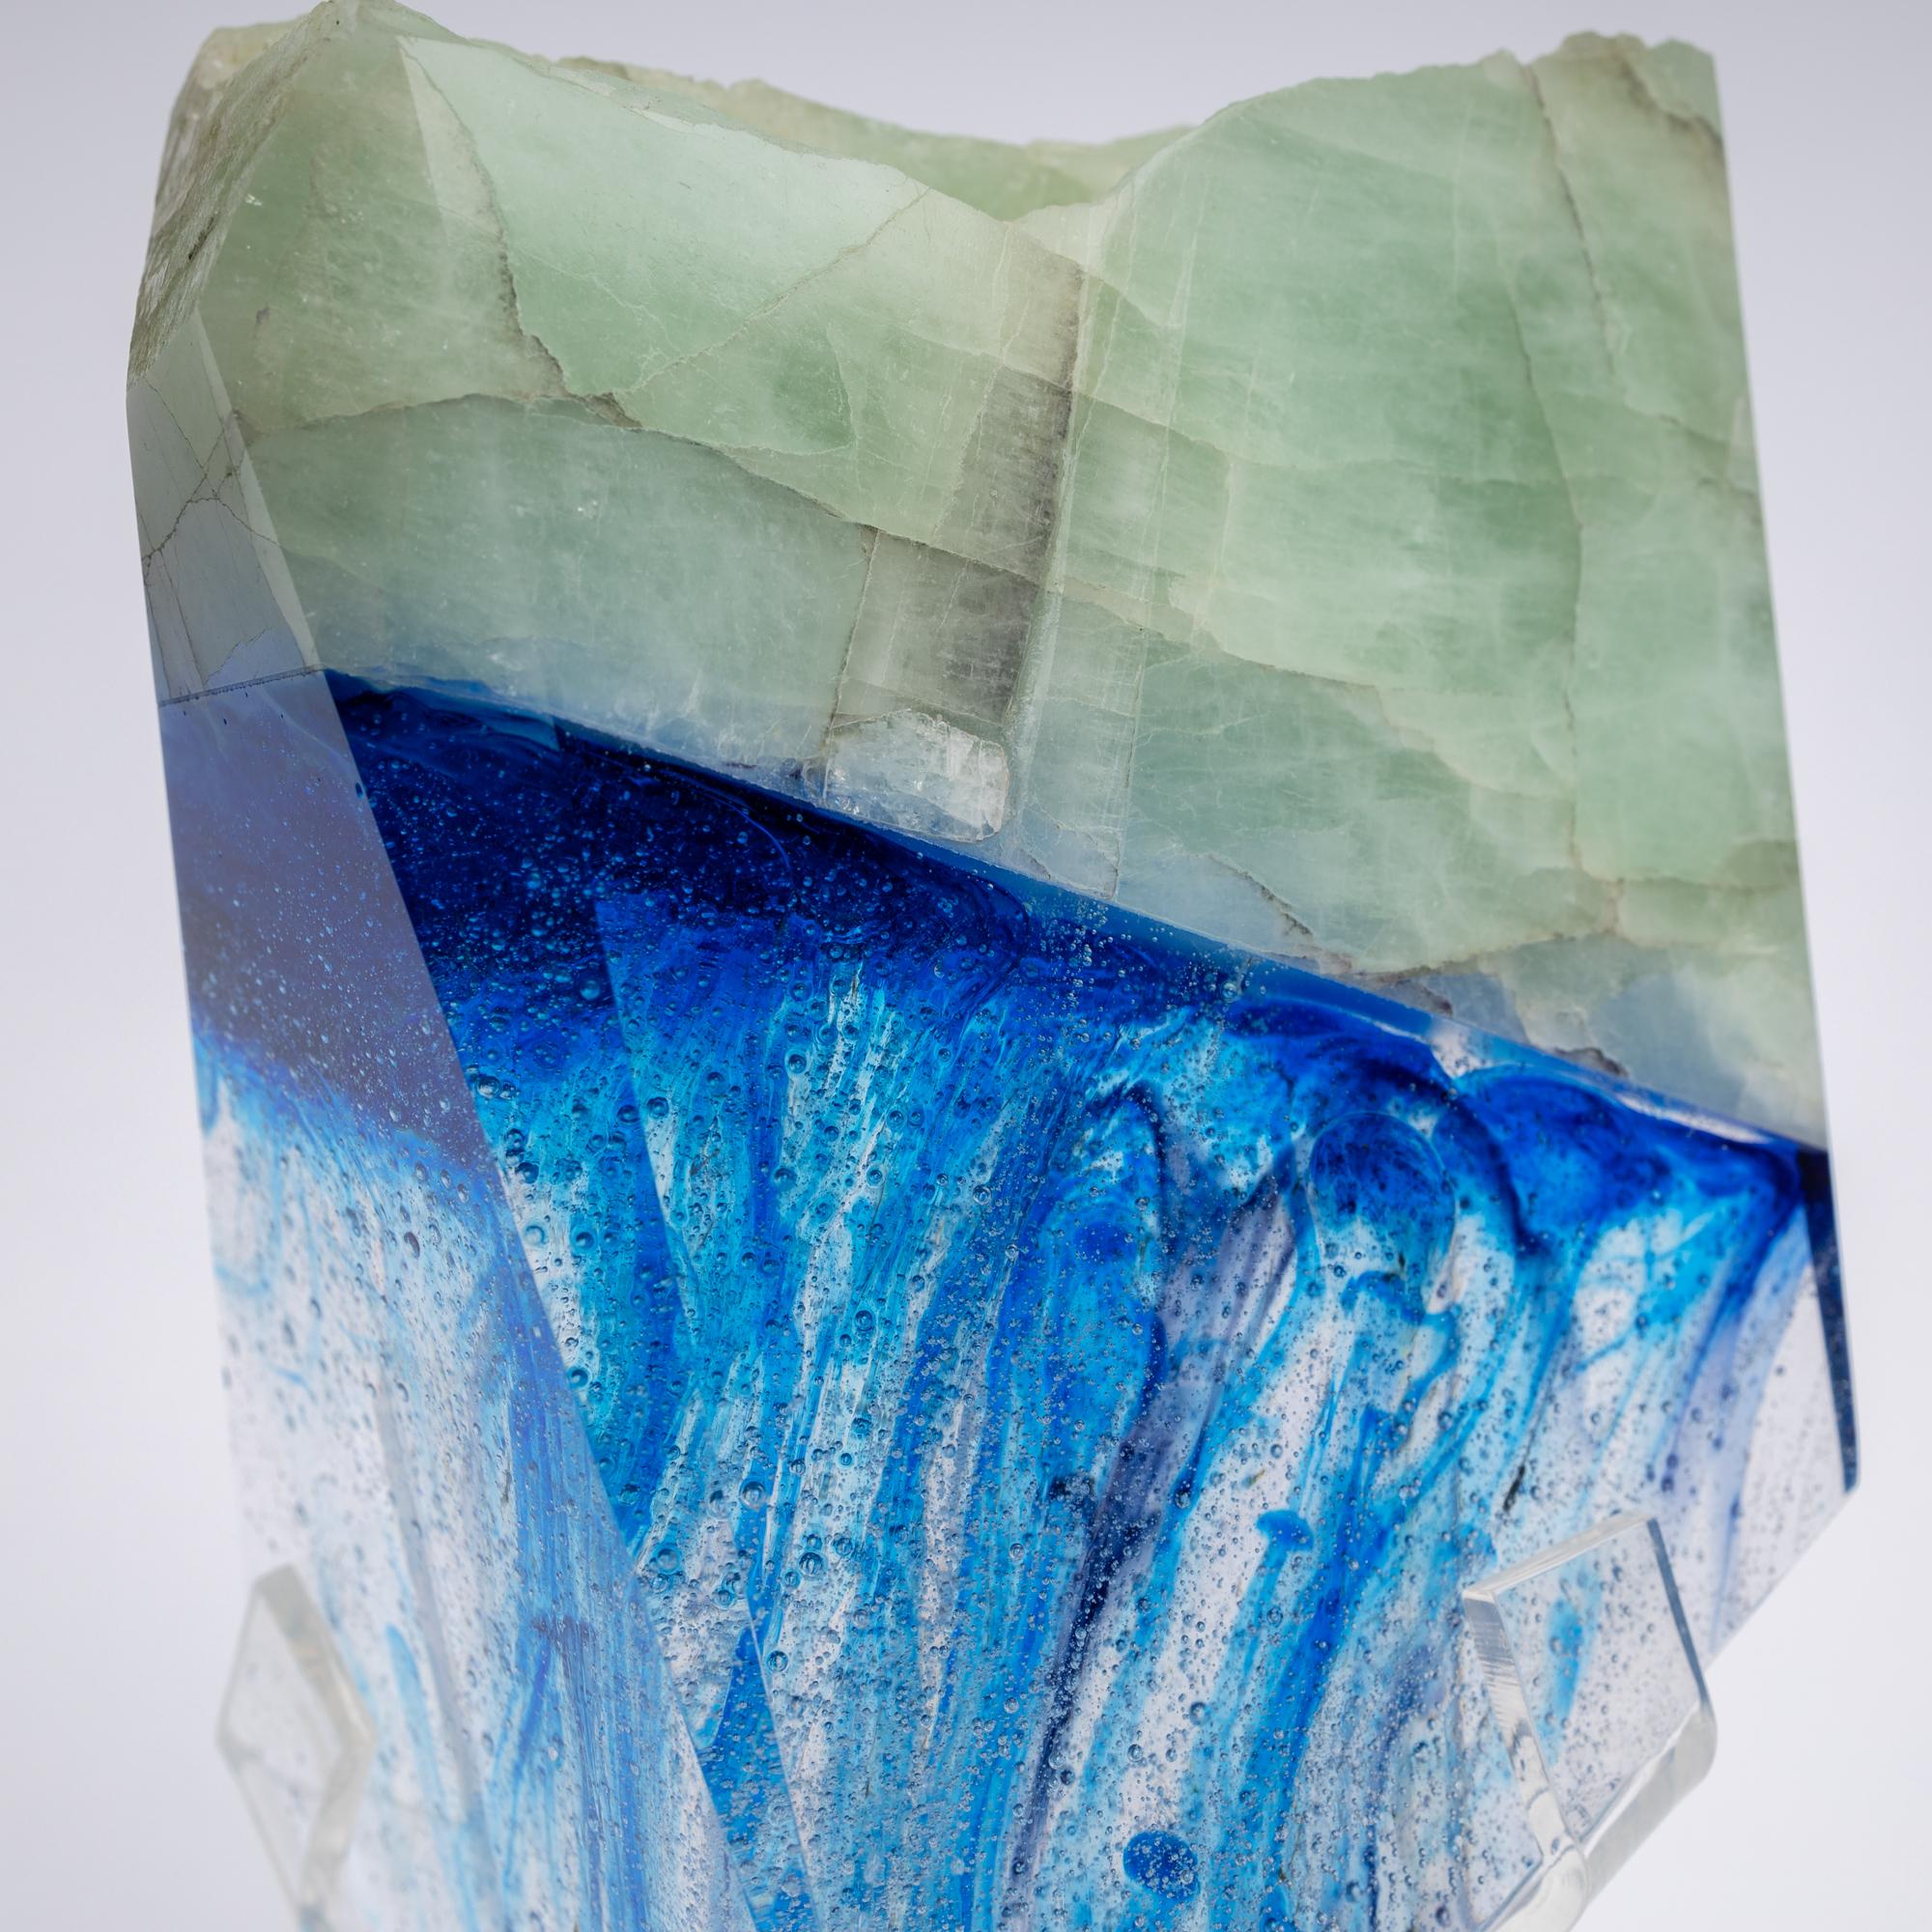 Contemporary Brazilian Aquamarine and Blue Hues Organic Faceted Glass Fusion Sculpture For Sale